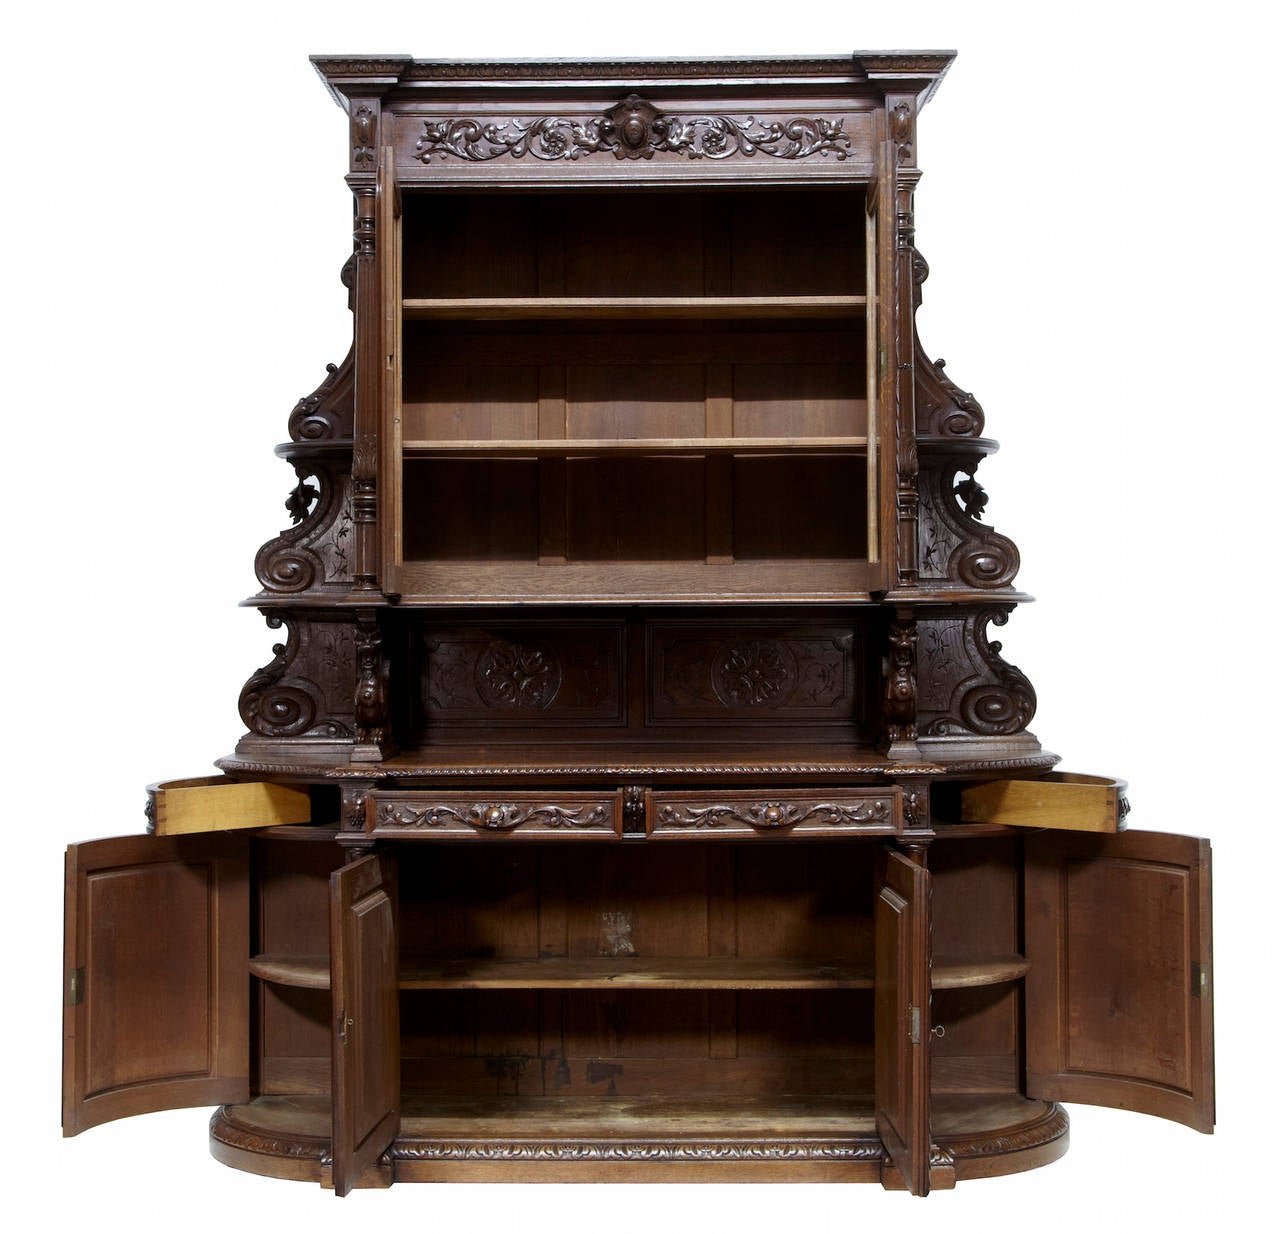 Stunning carved flemish hunt dresser circa 1870. 
Comprising of 3 sections. 
Top section with glazed double door containing 2 shelves, flanked either side by columns and rounded open shelves. 
Dragon supports lead down to the bow end base which